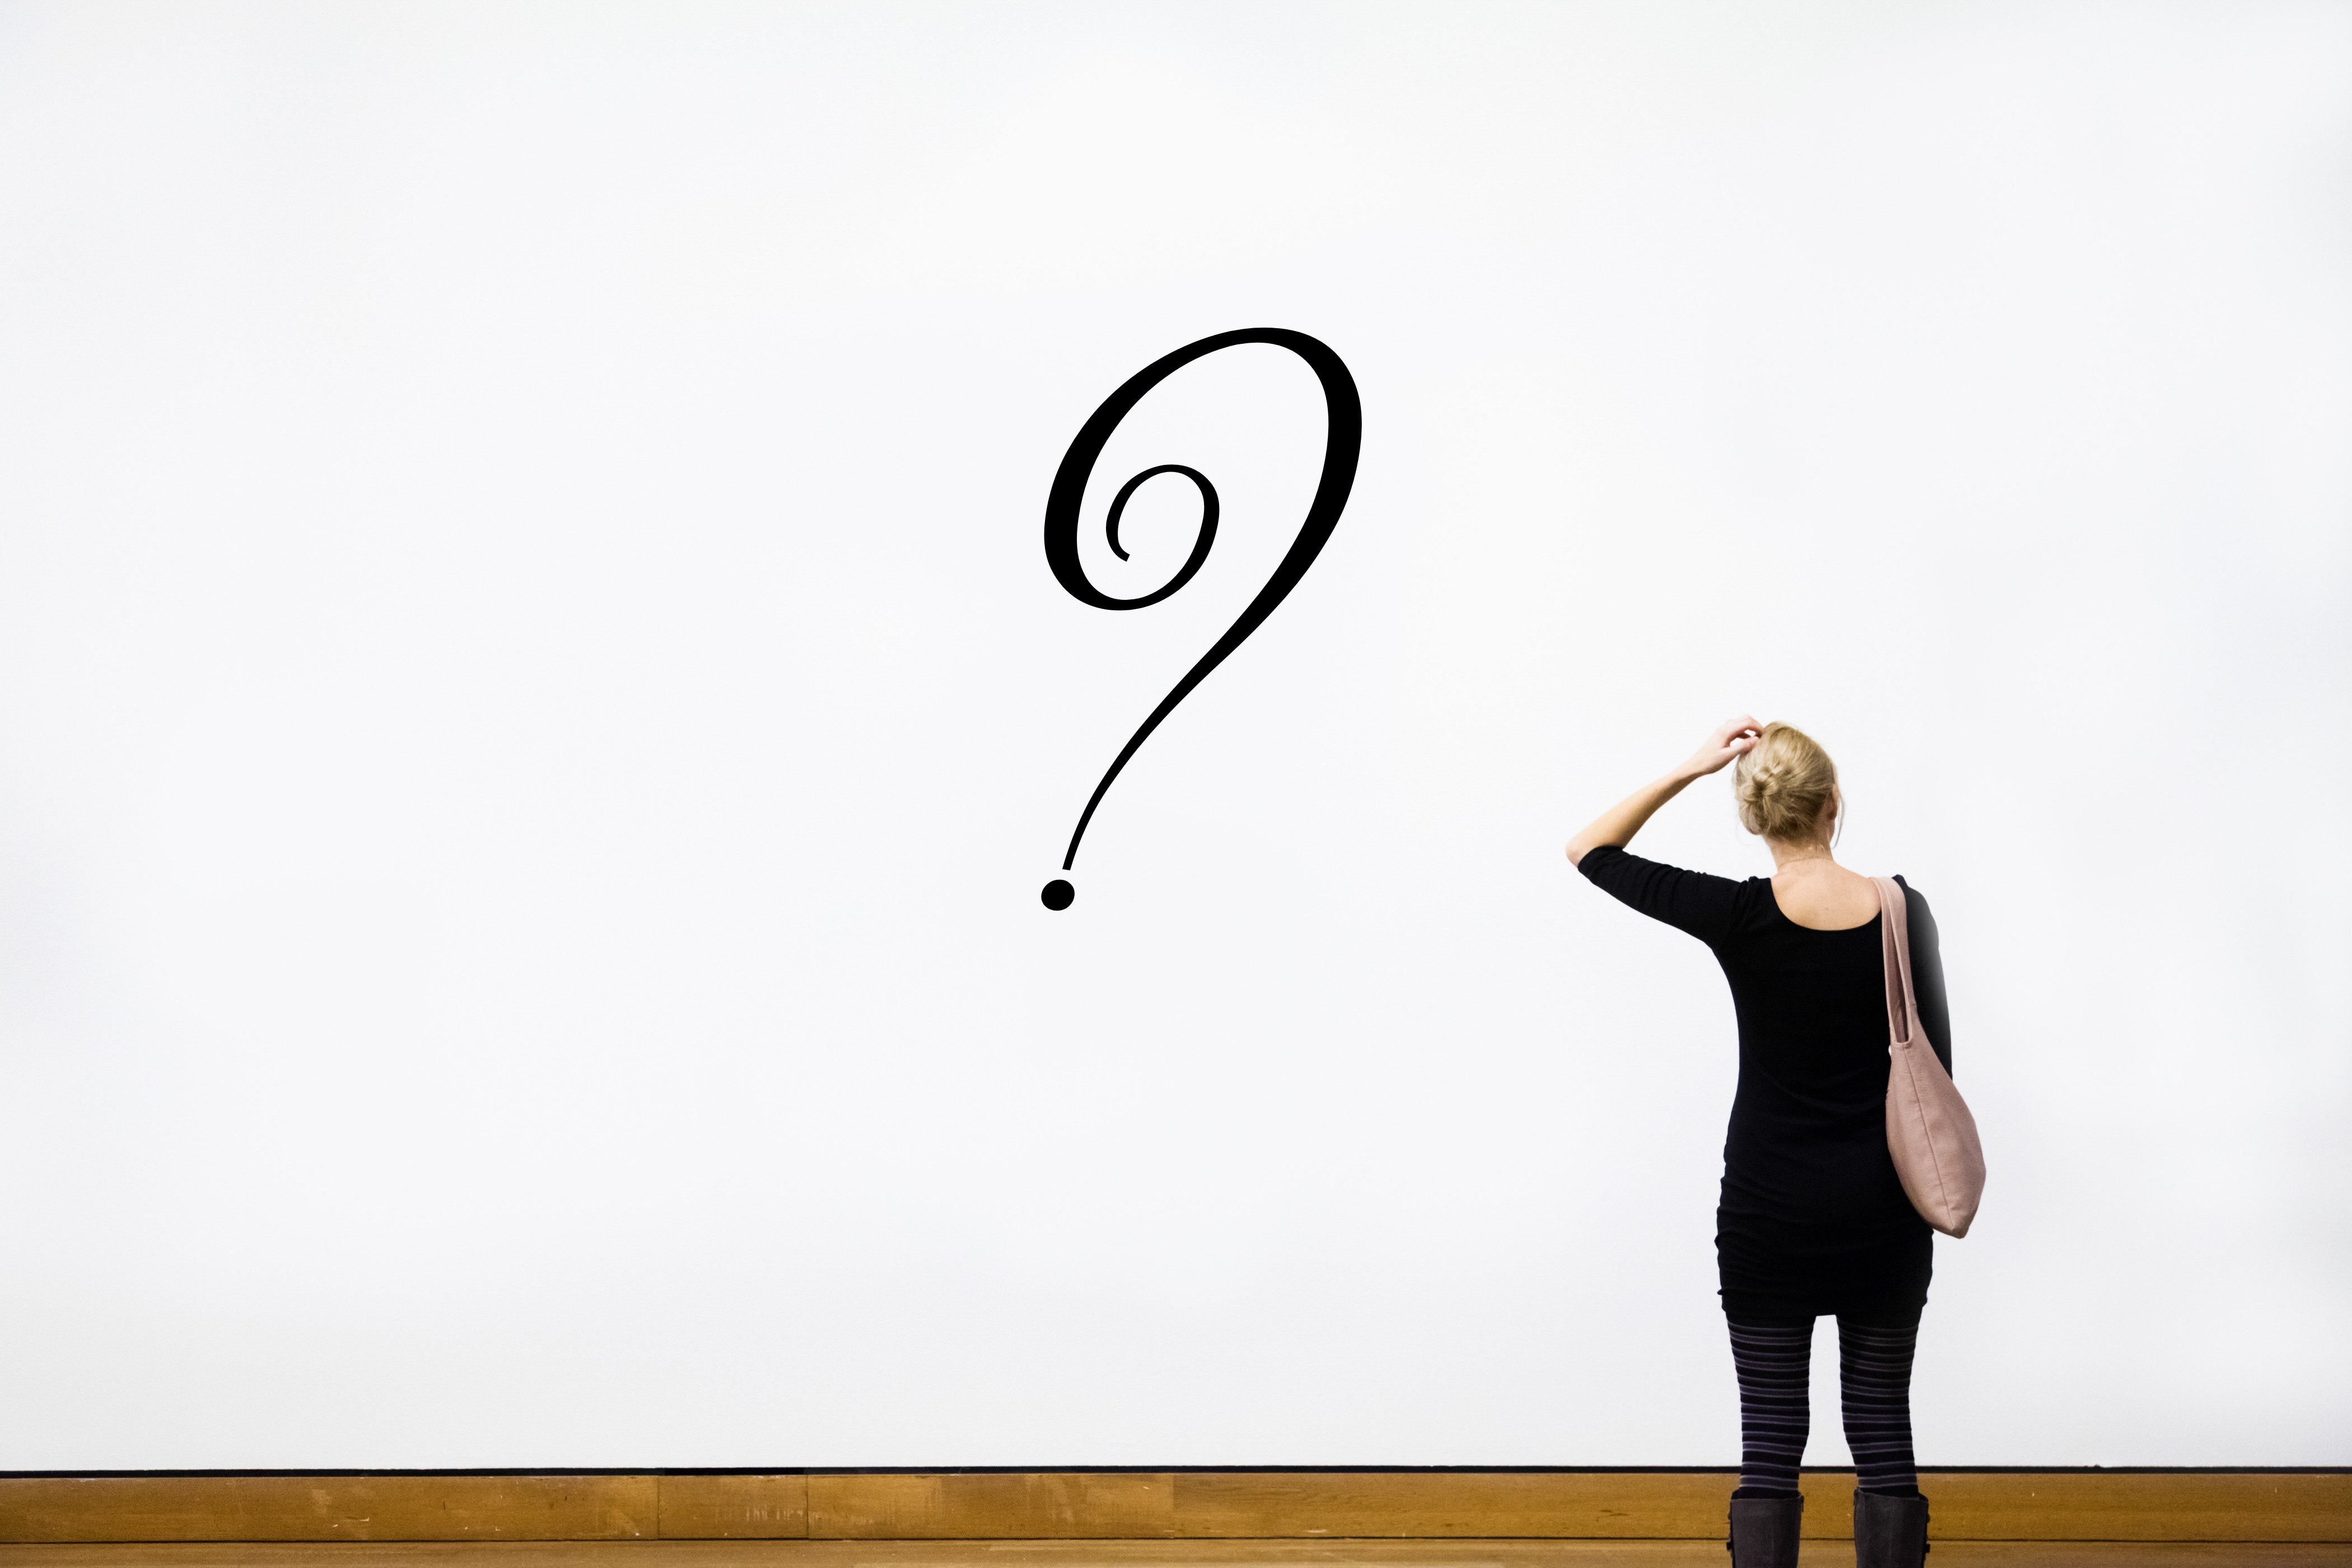 Woman wondering at a question